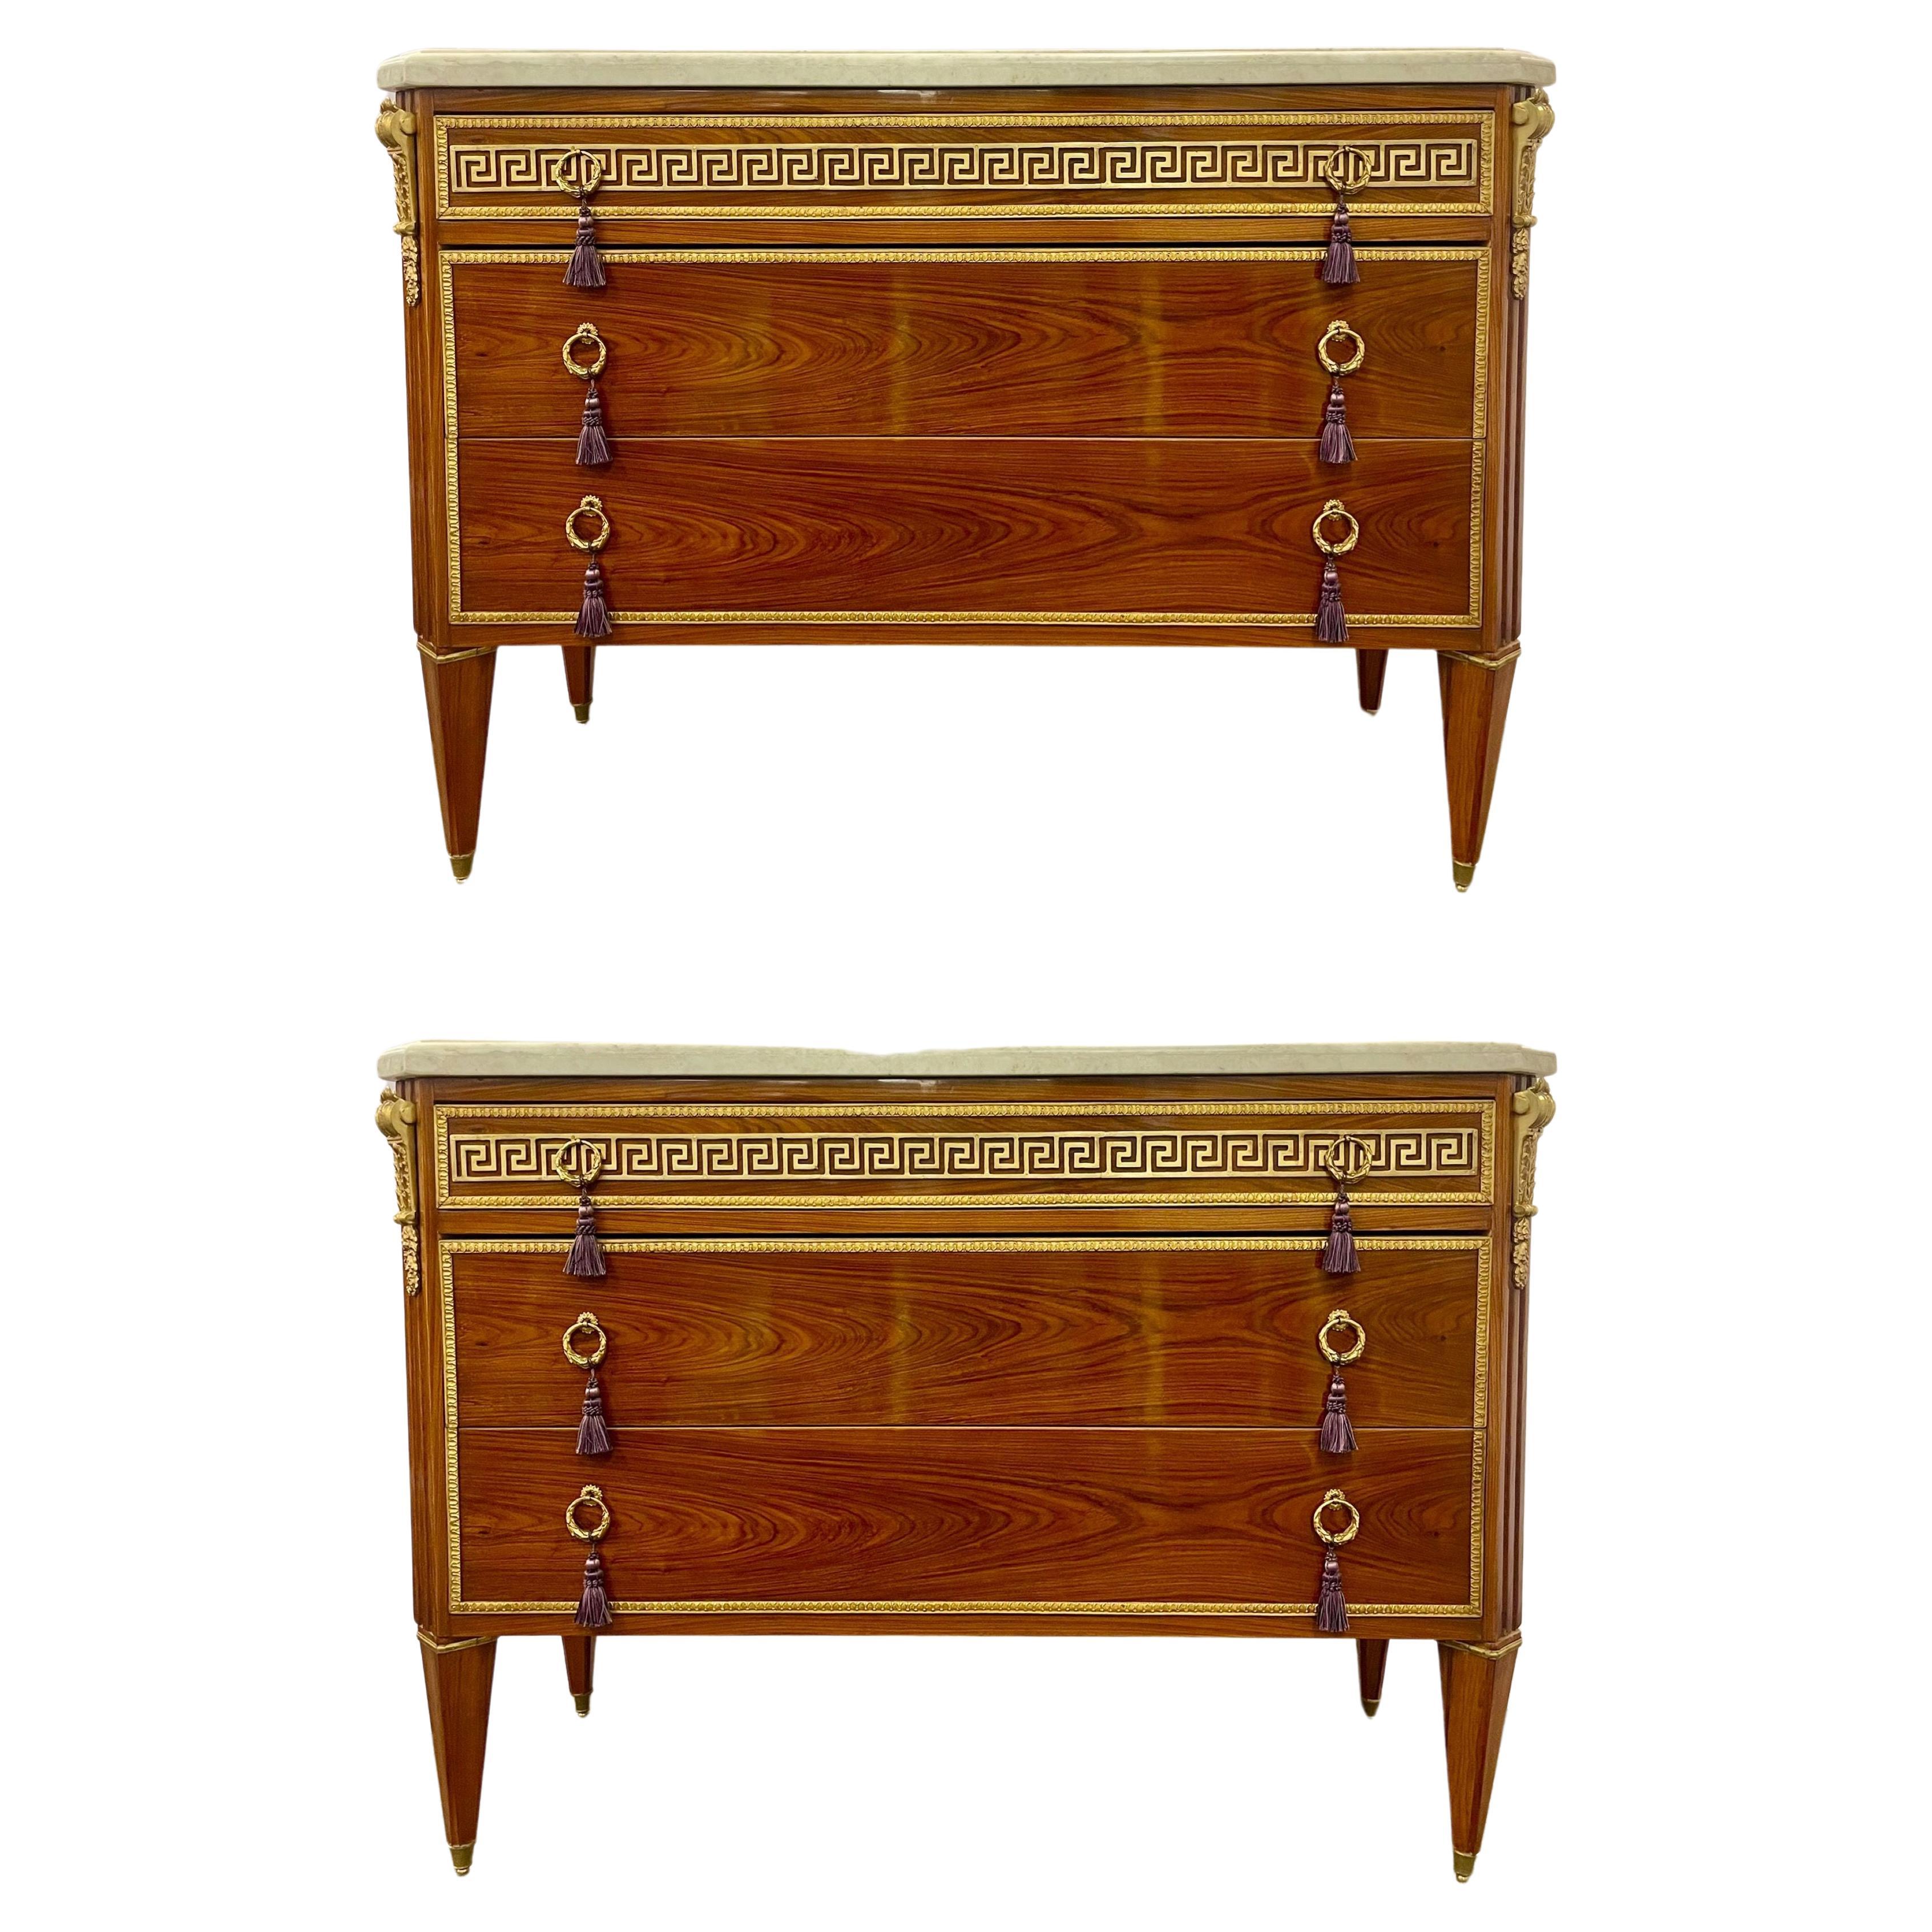 Pair of Tortoise Louis XVI Style Commodes, Chests or Nightstands, Greek Key